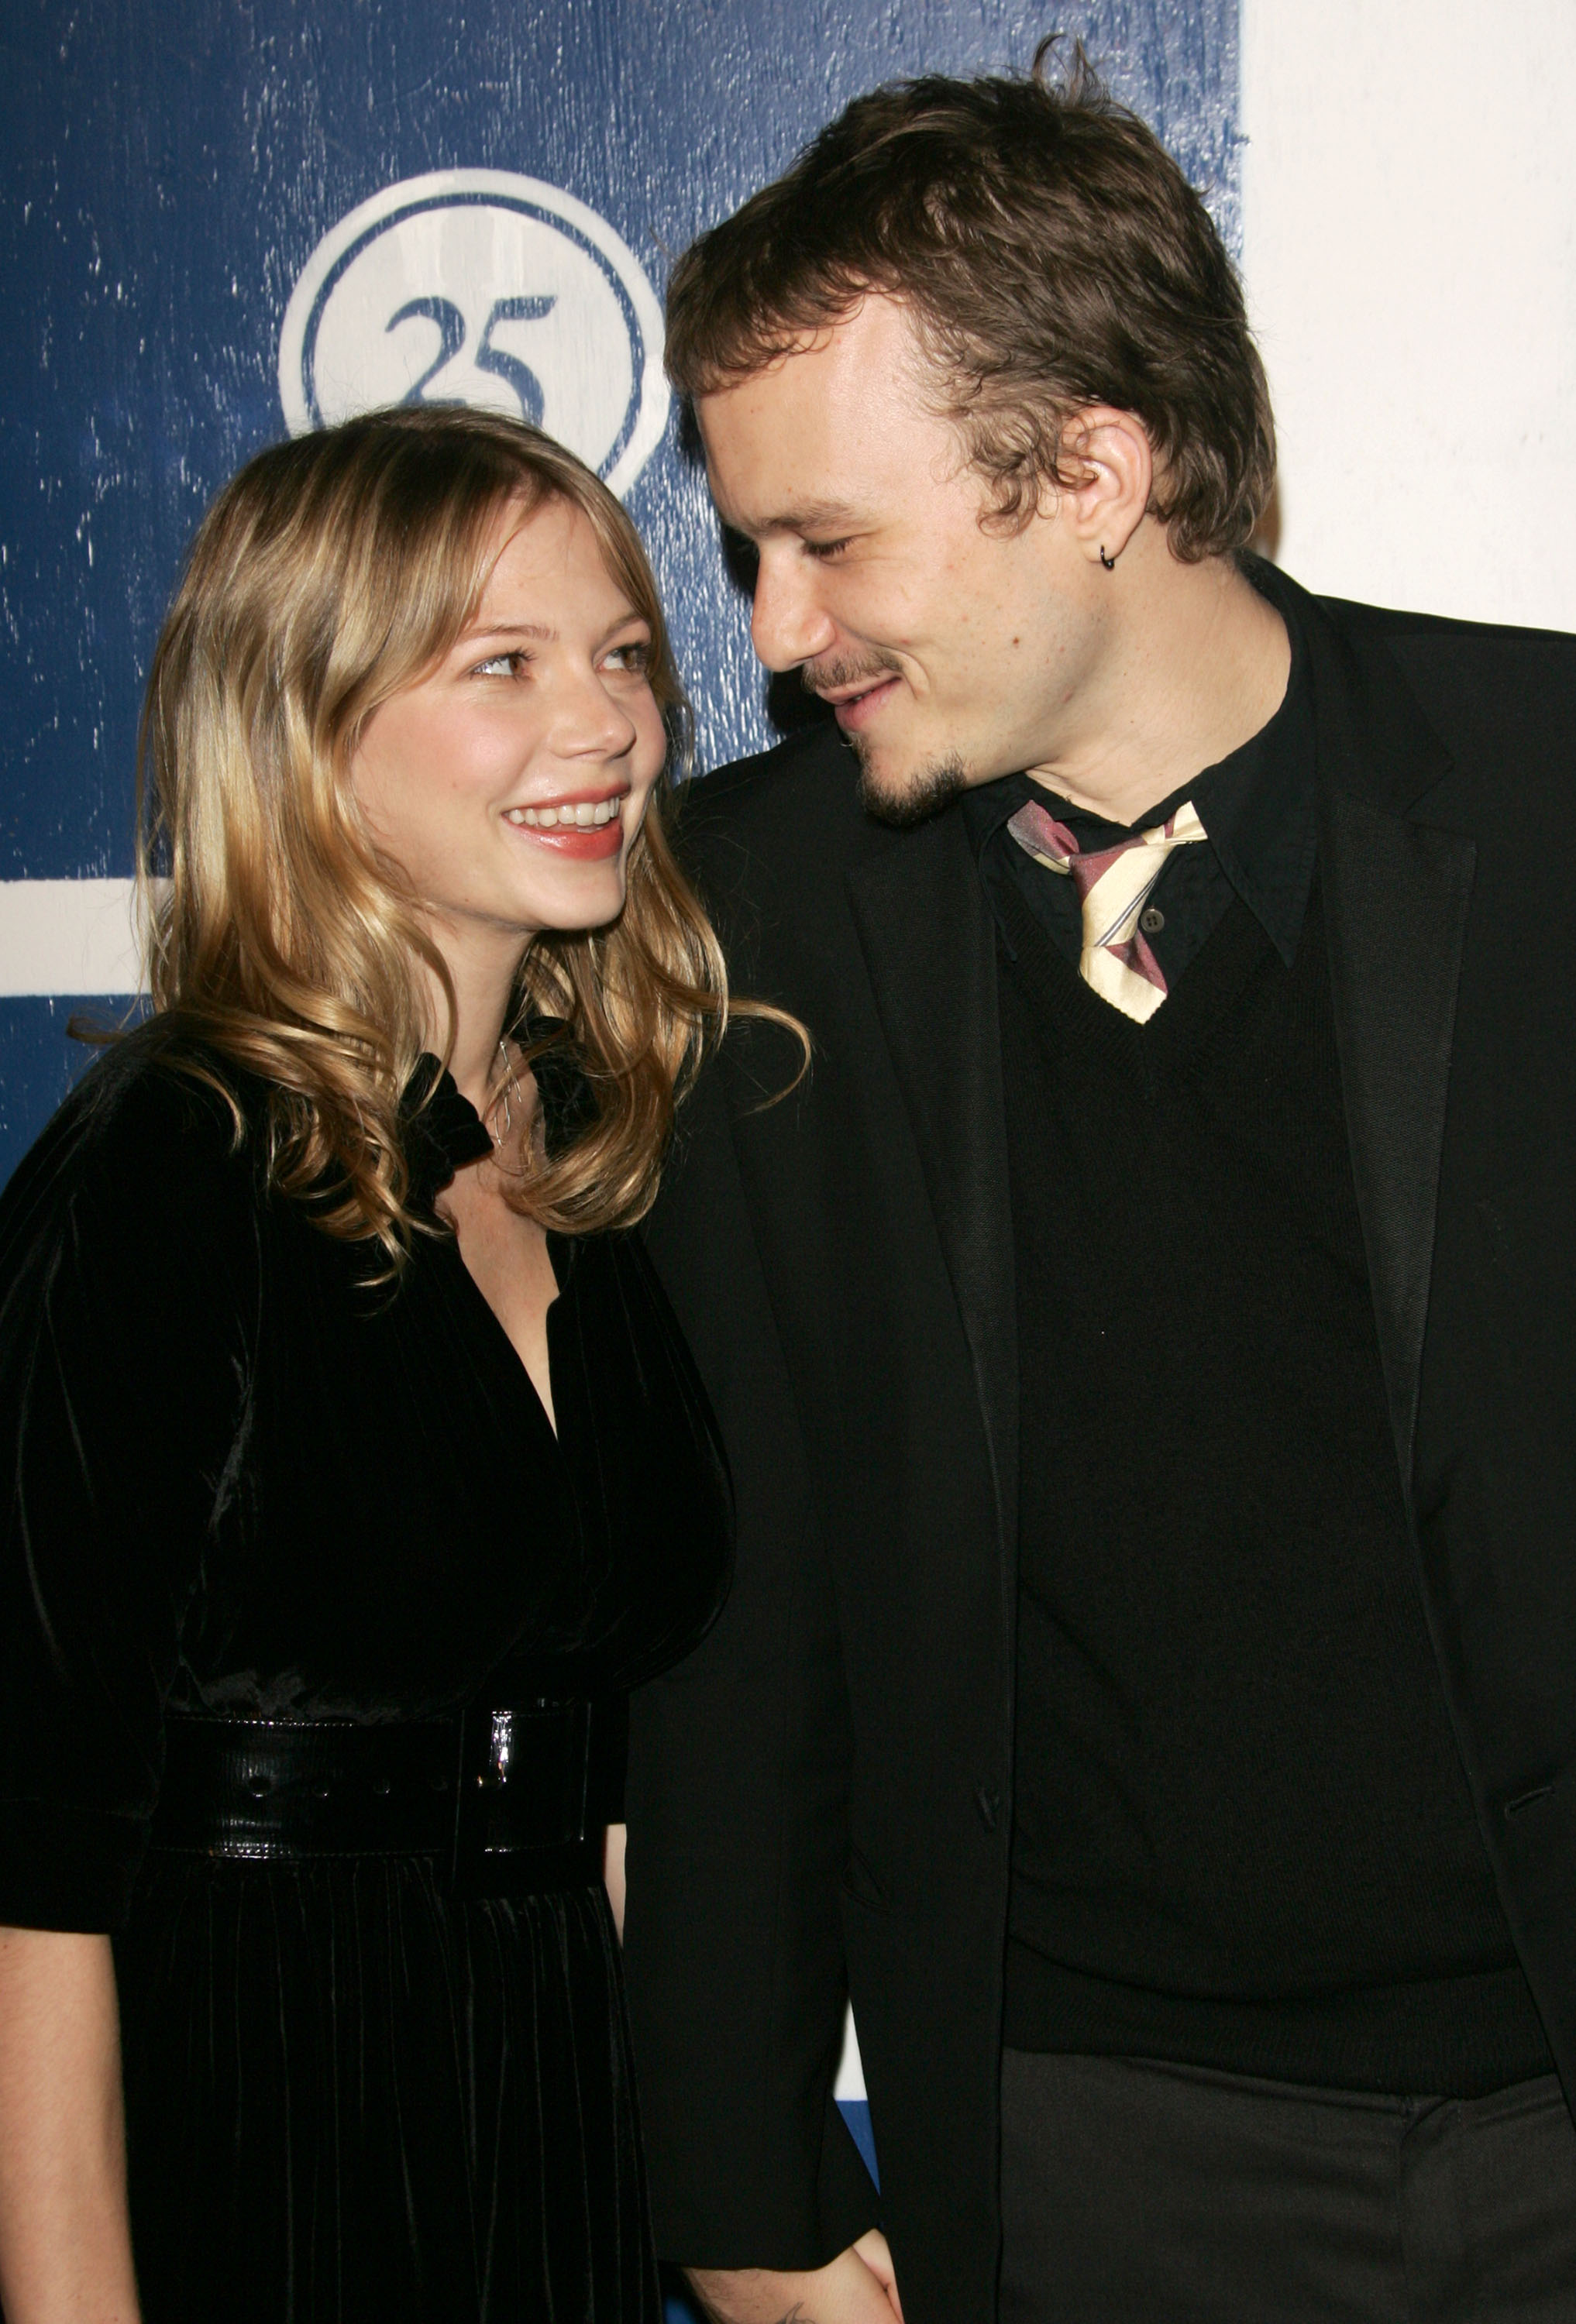 Michelle Williams and Heath Ledger at the 15th Annual Gotham Awards in New York City on November 30, 2005 | Source: Getty Images